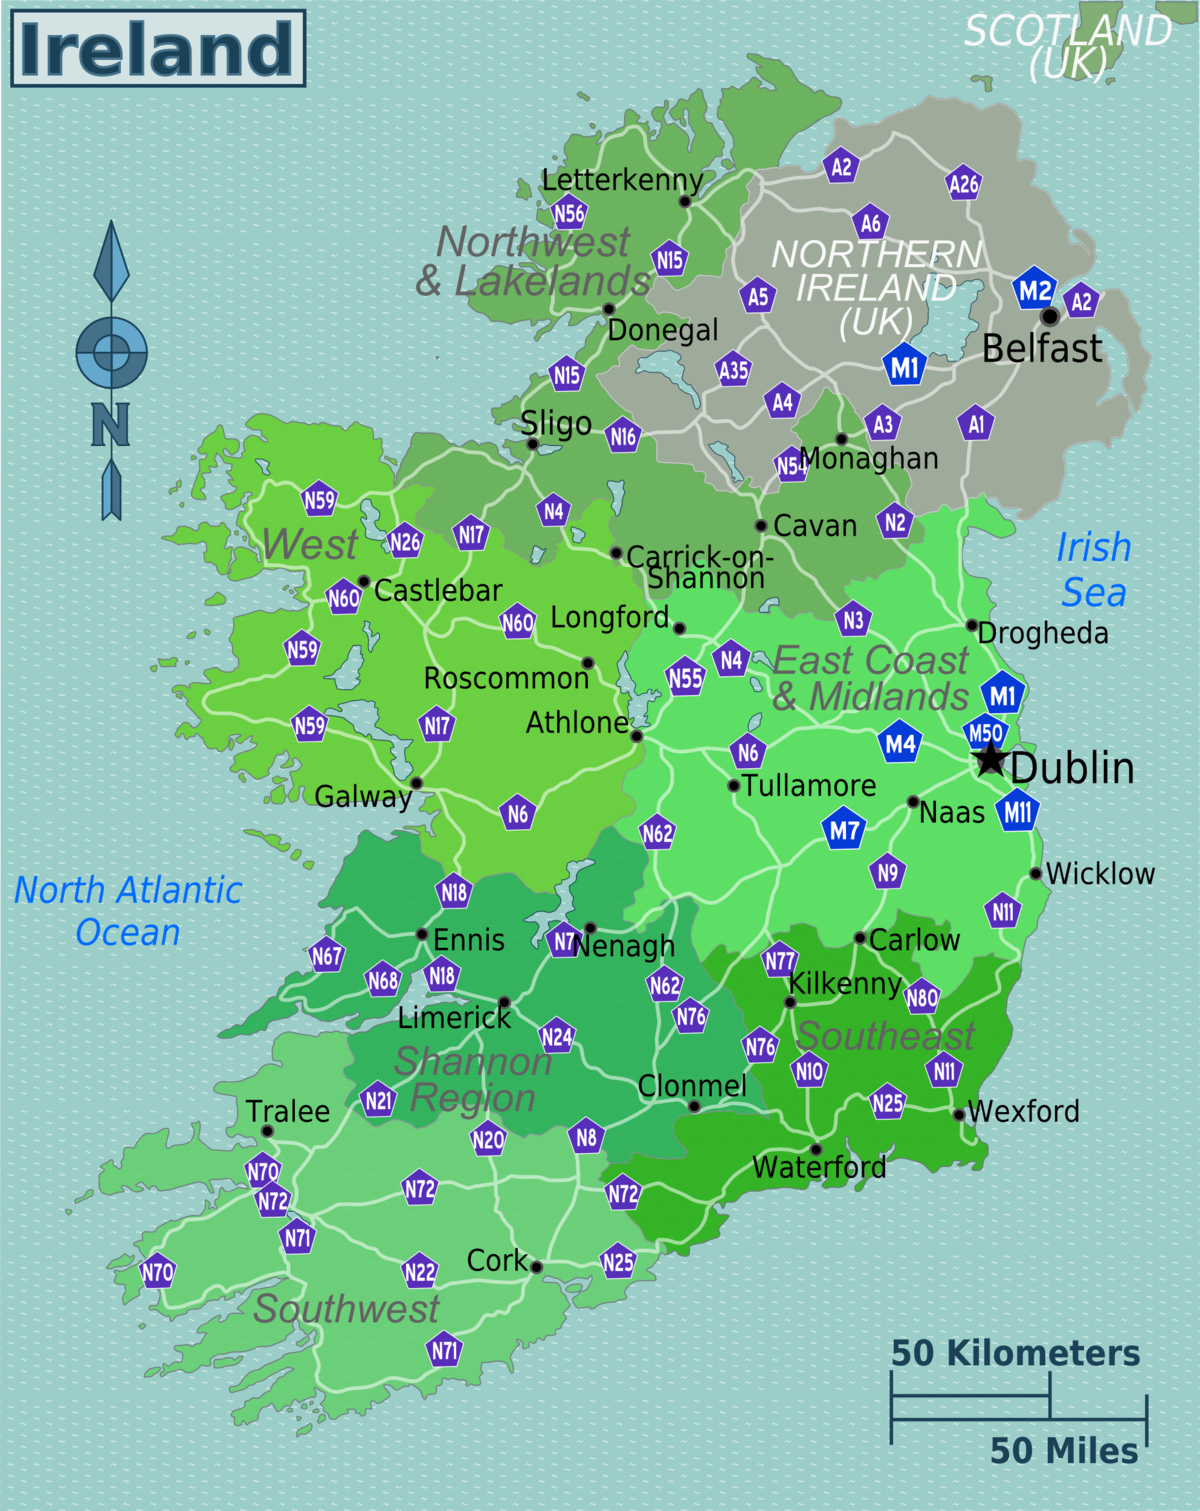 Ireland – Travel guide at Wikivoyage